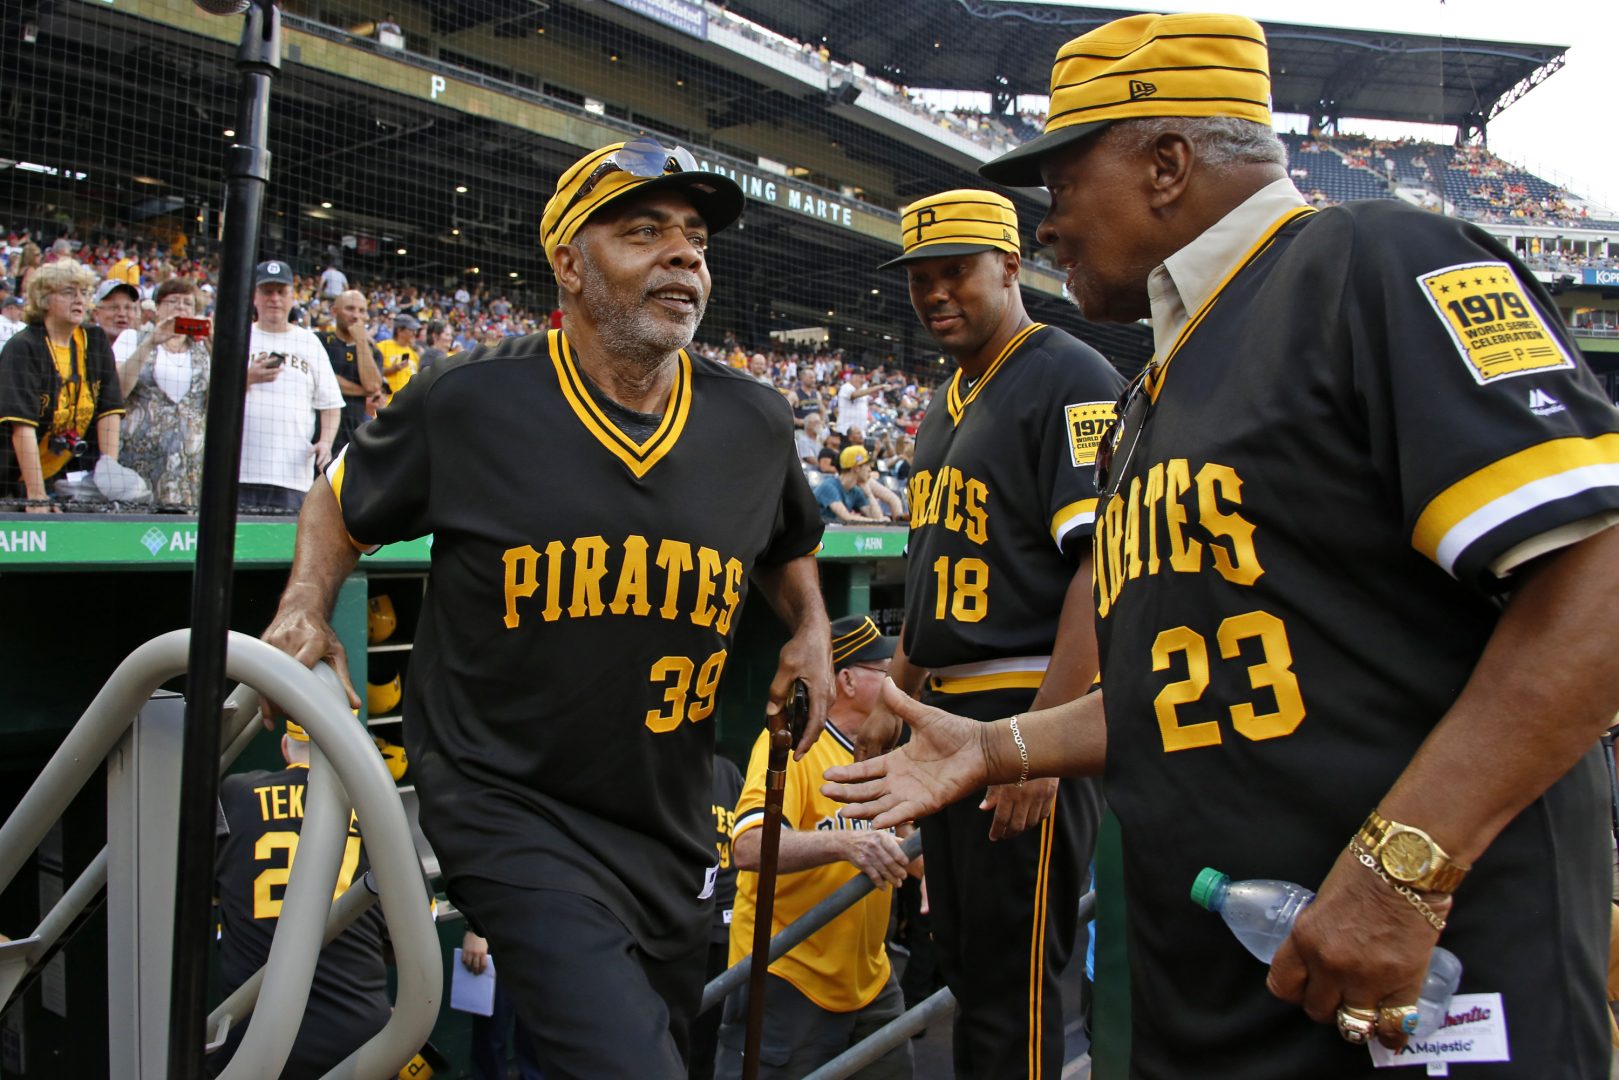 Grant Jackson, winning pitcher in Pirates' 1979 World Series Game 7 win,  dies at 78